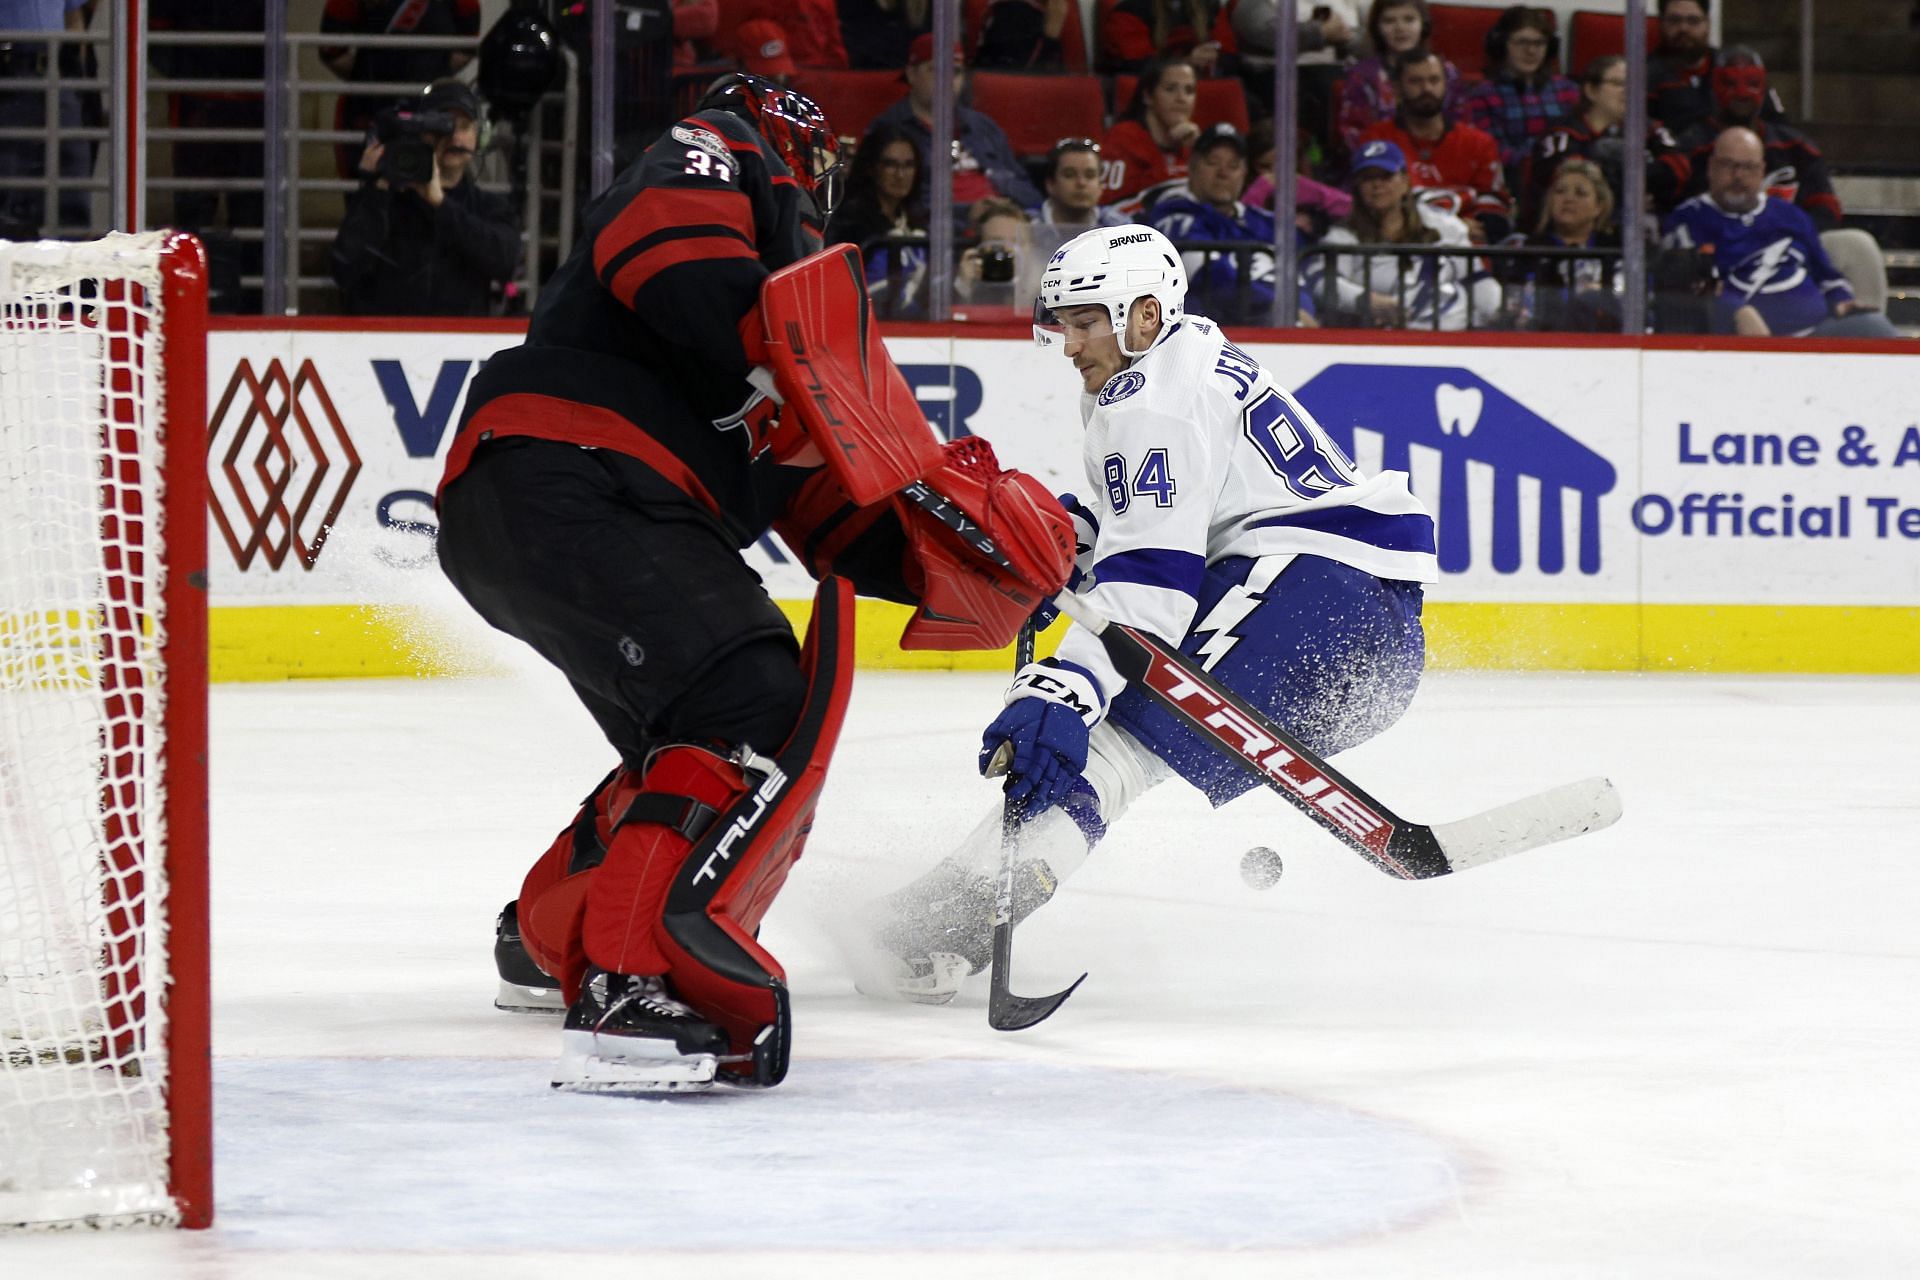 Carolina Hurricanes vs Tampa Bay Lightning Live streaming options, how and where to watch NHL live on TV, Channel List, and more